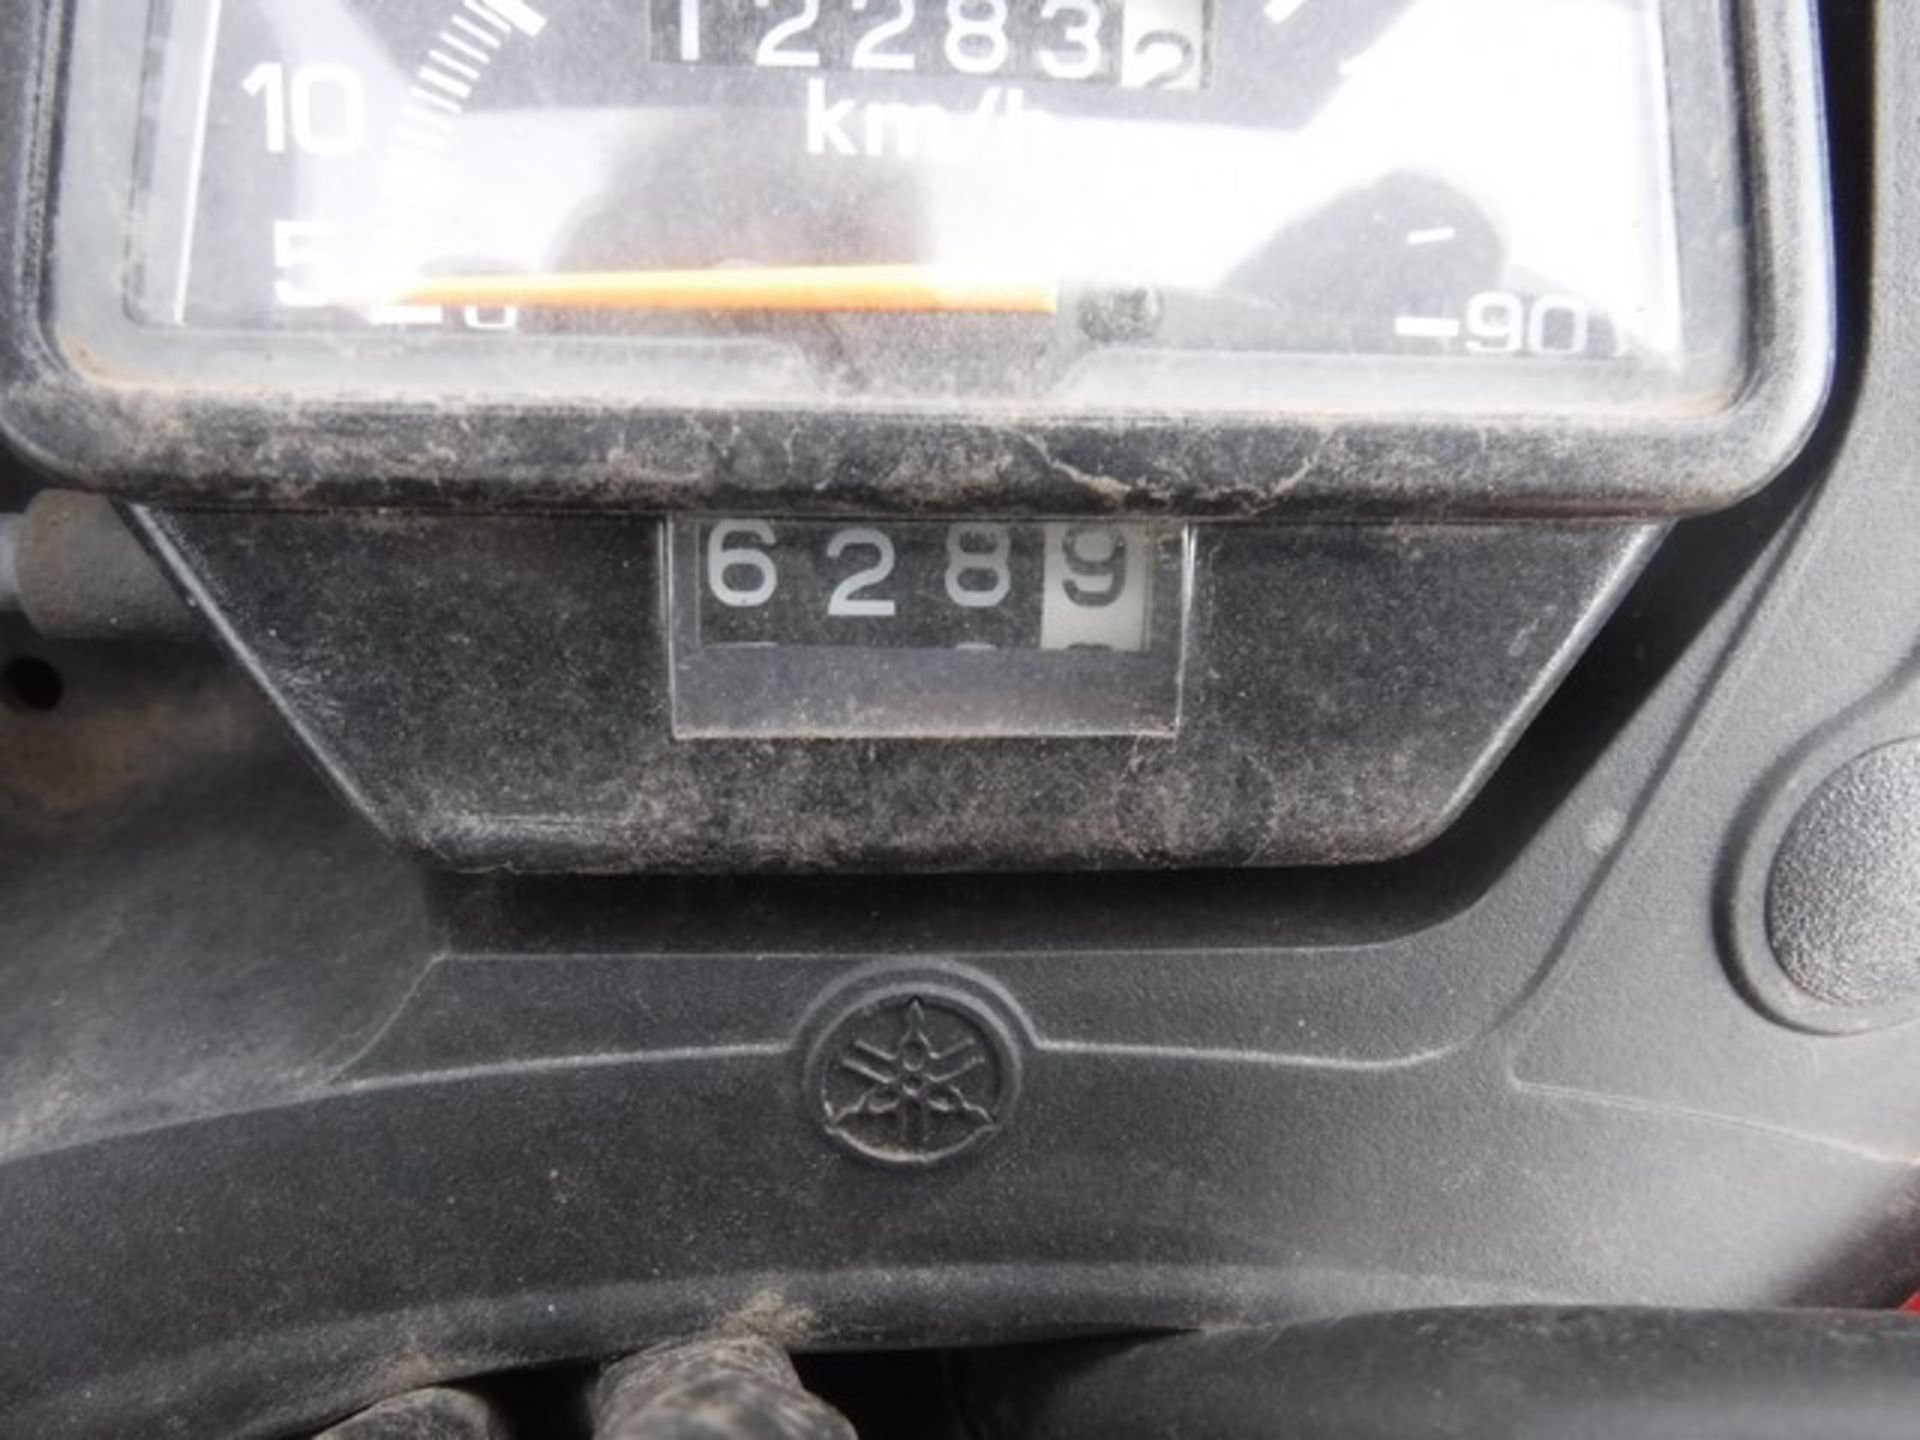 YAMAHA GRIZZLY 2WD QUAD 2008, 12283 KM AND 626 HRS (NOT VERIFIED) - Image 7 of 7